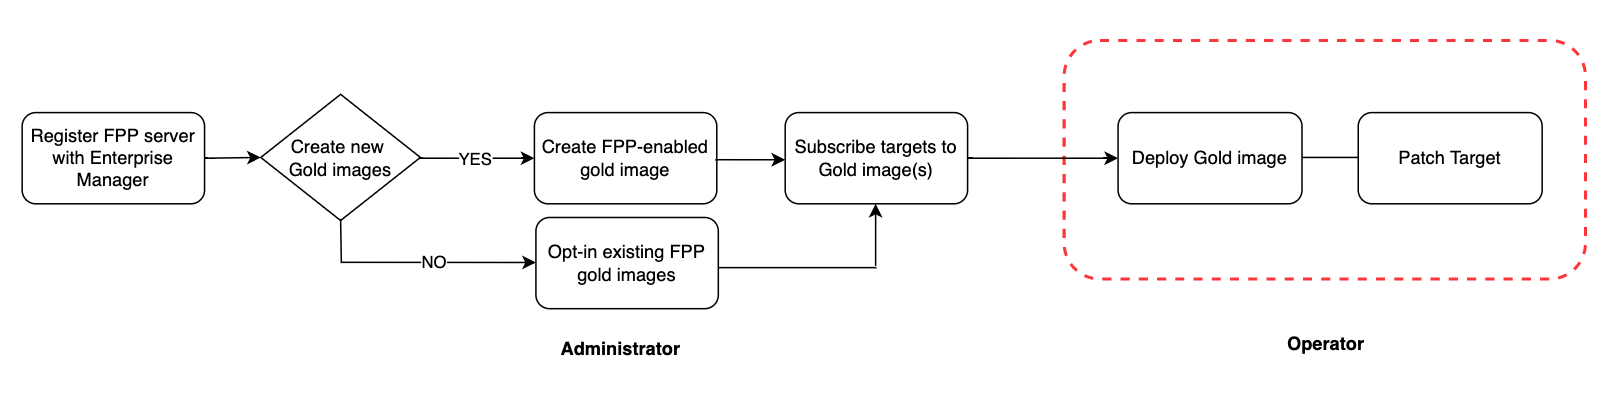 Workflow depicting Administrator and Operator tasks to deploy FFP enabled images in Enterprise Manager